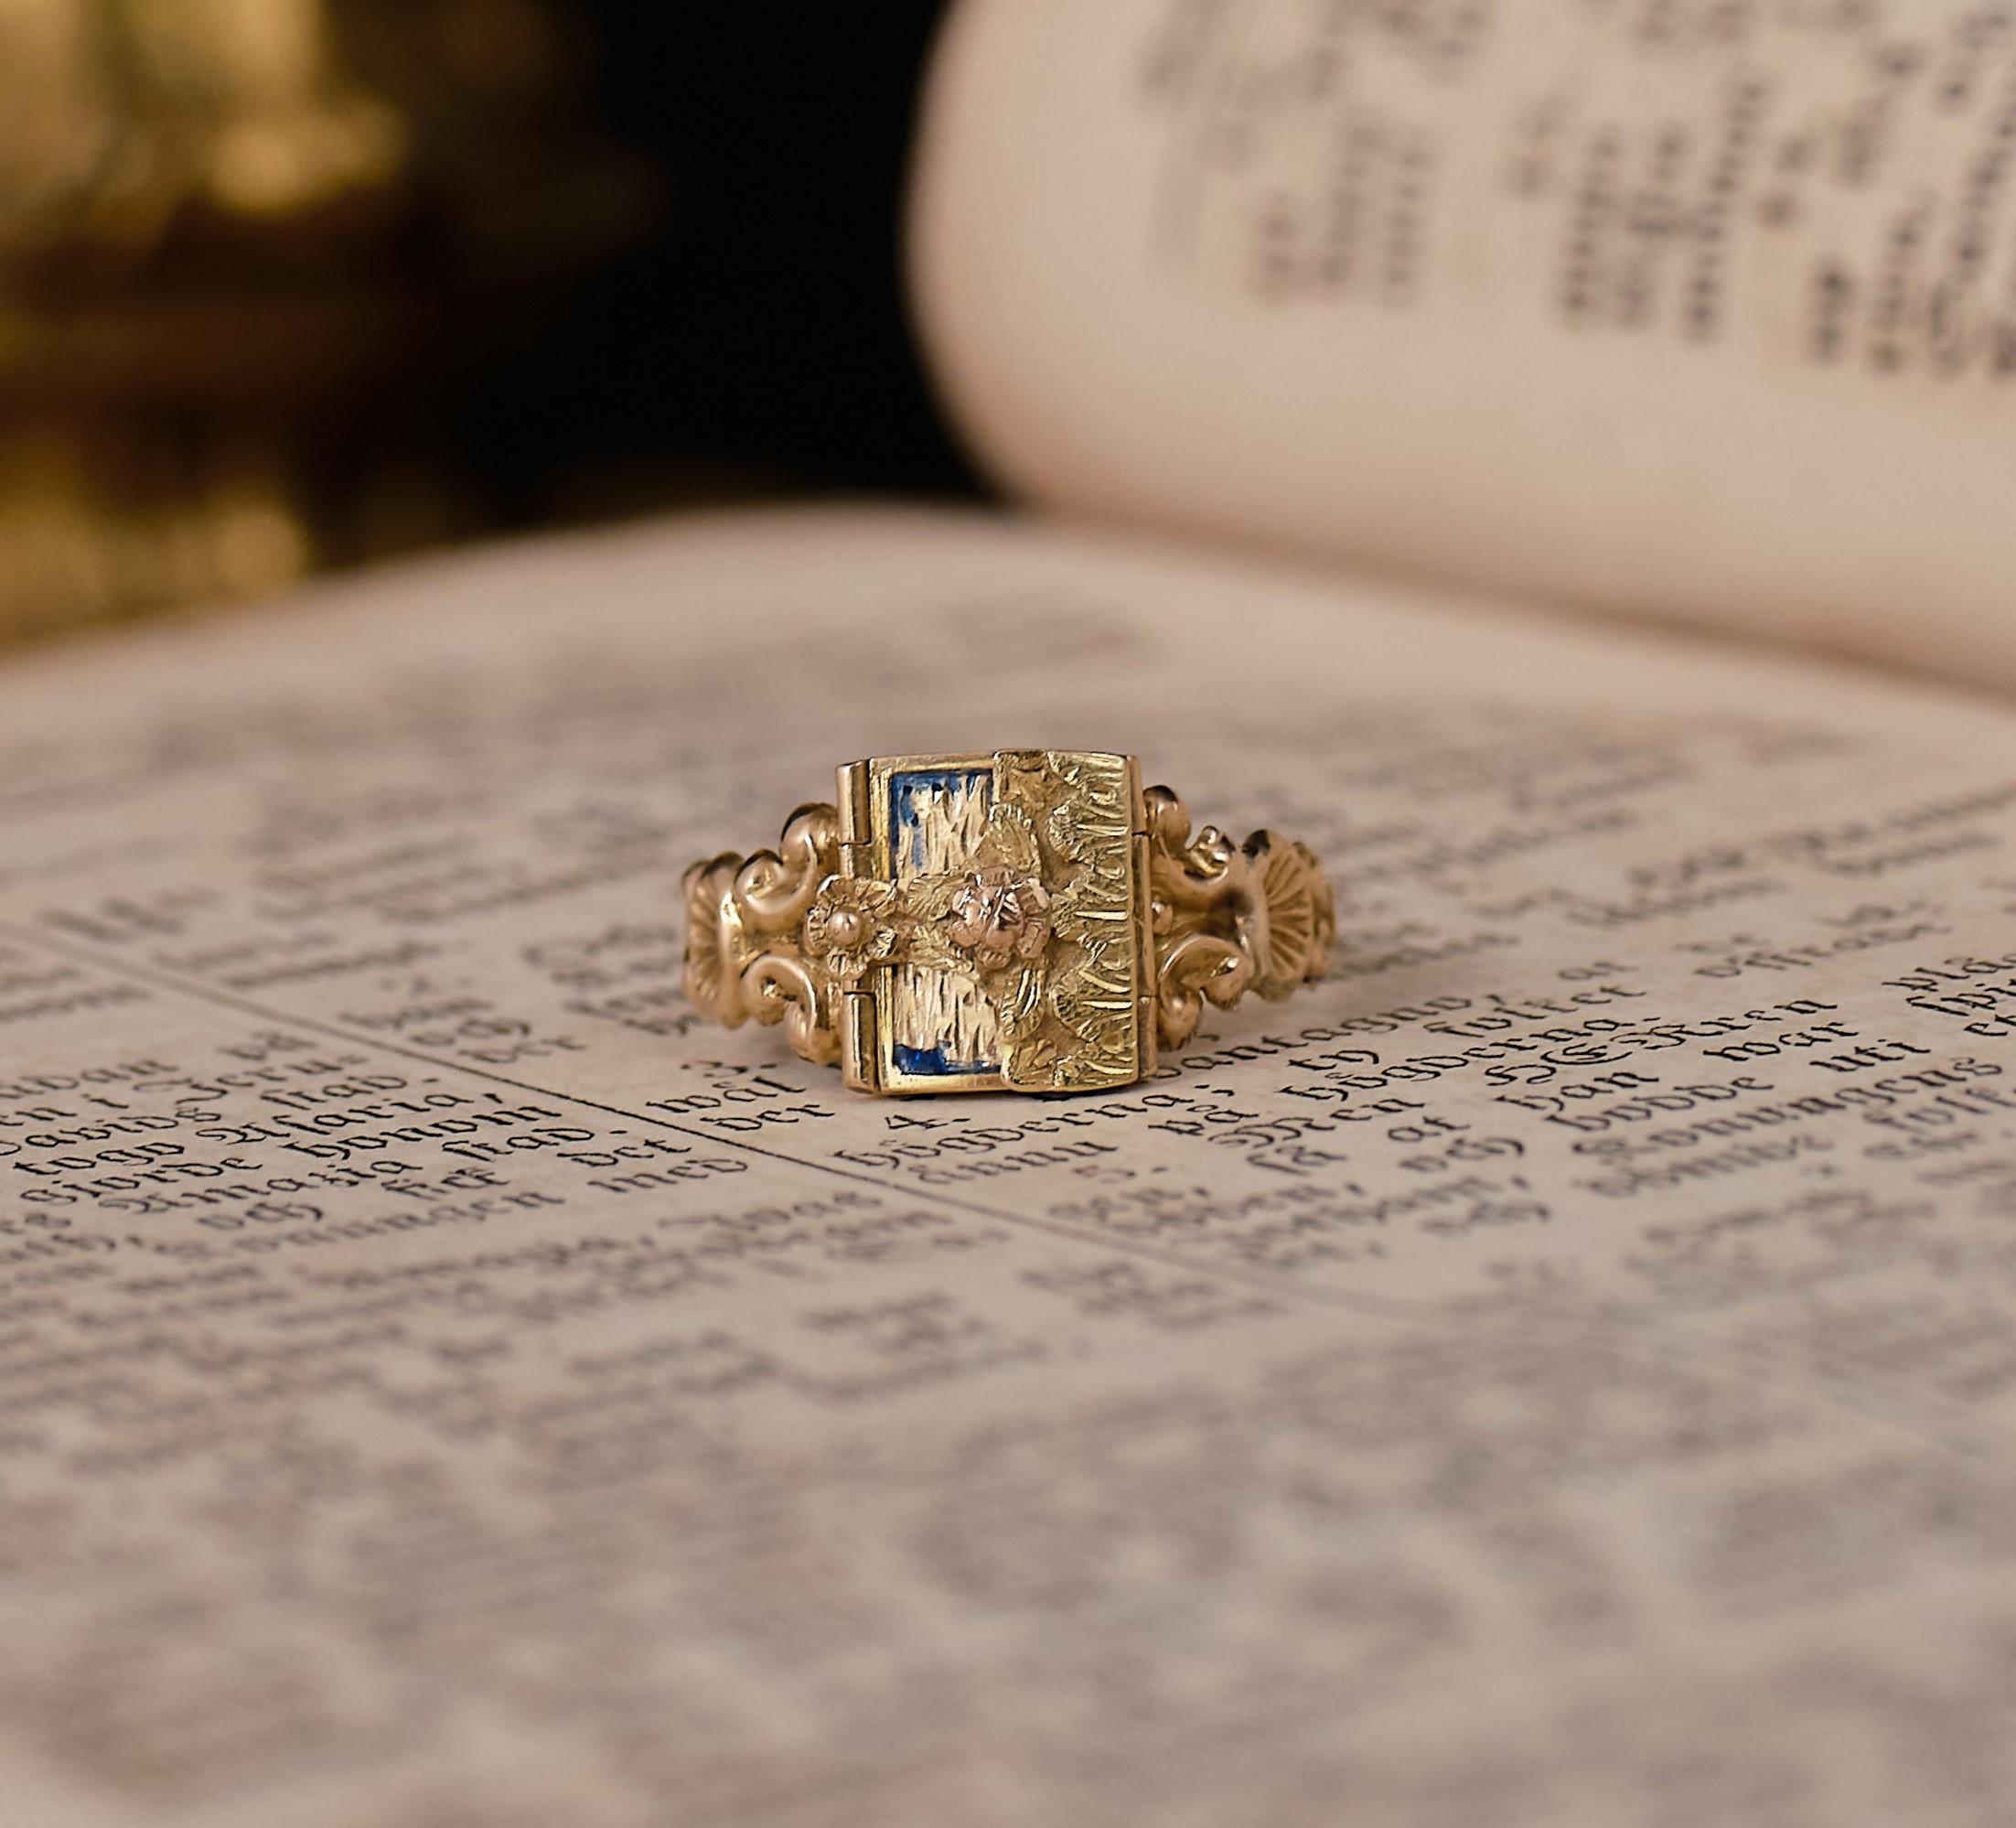 Romantic 19th century Rococo Revival “forget-me-not” remembrance ring 1